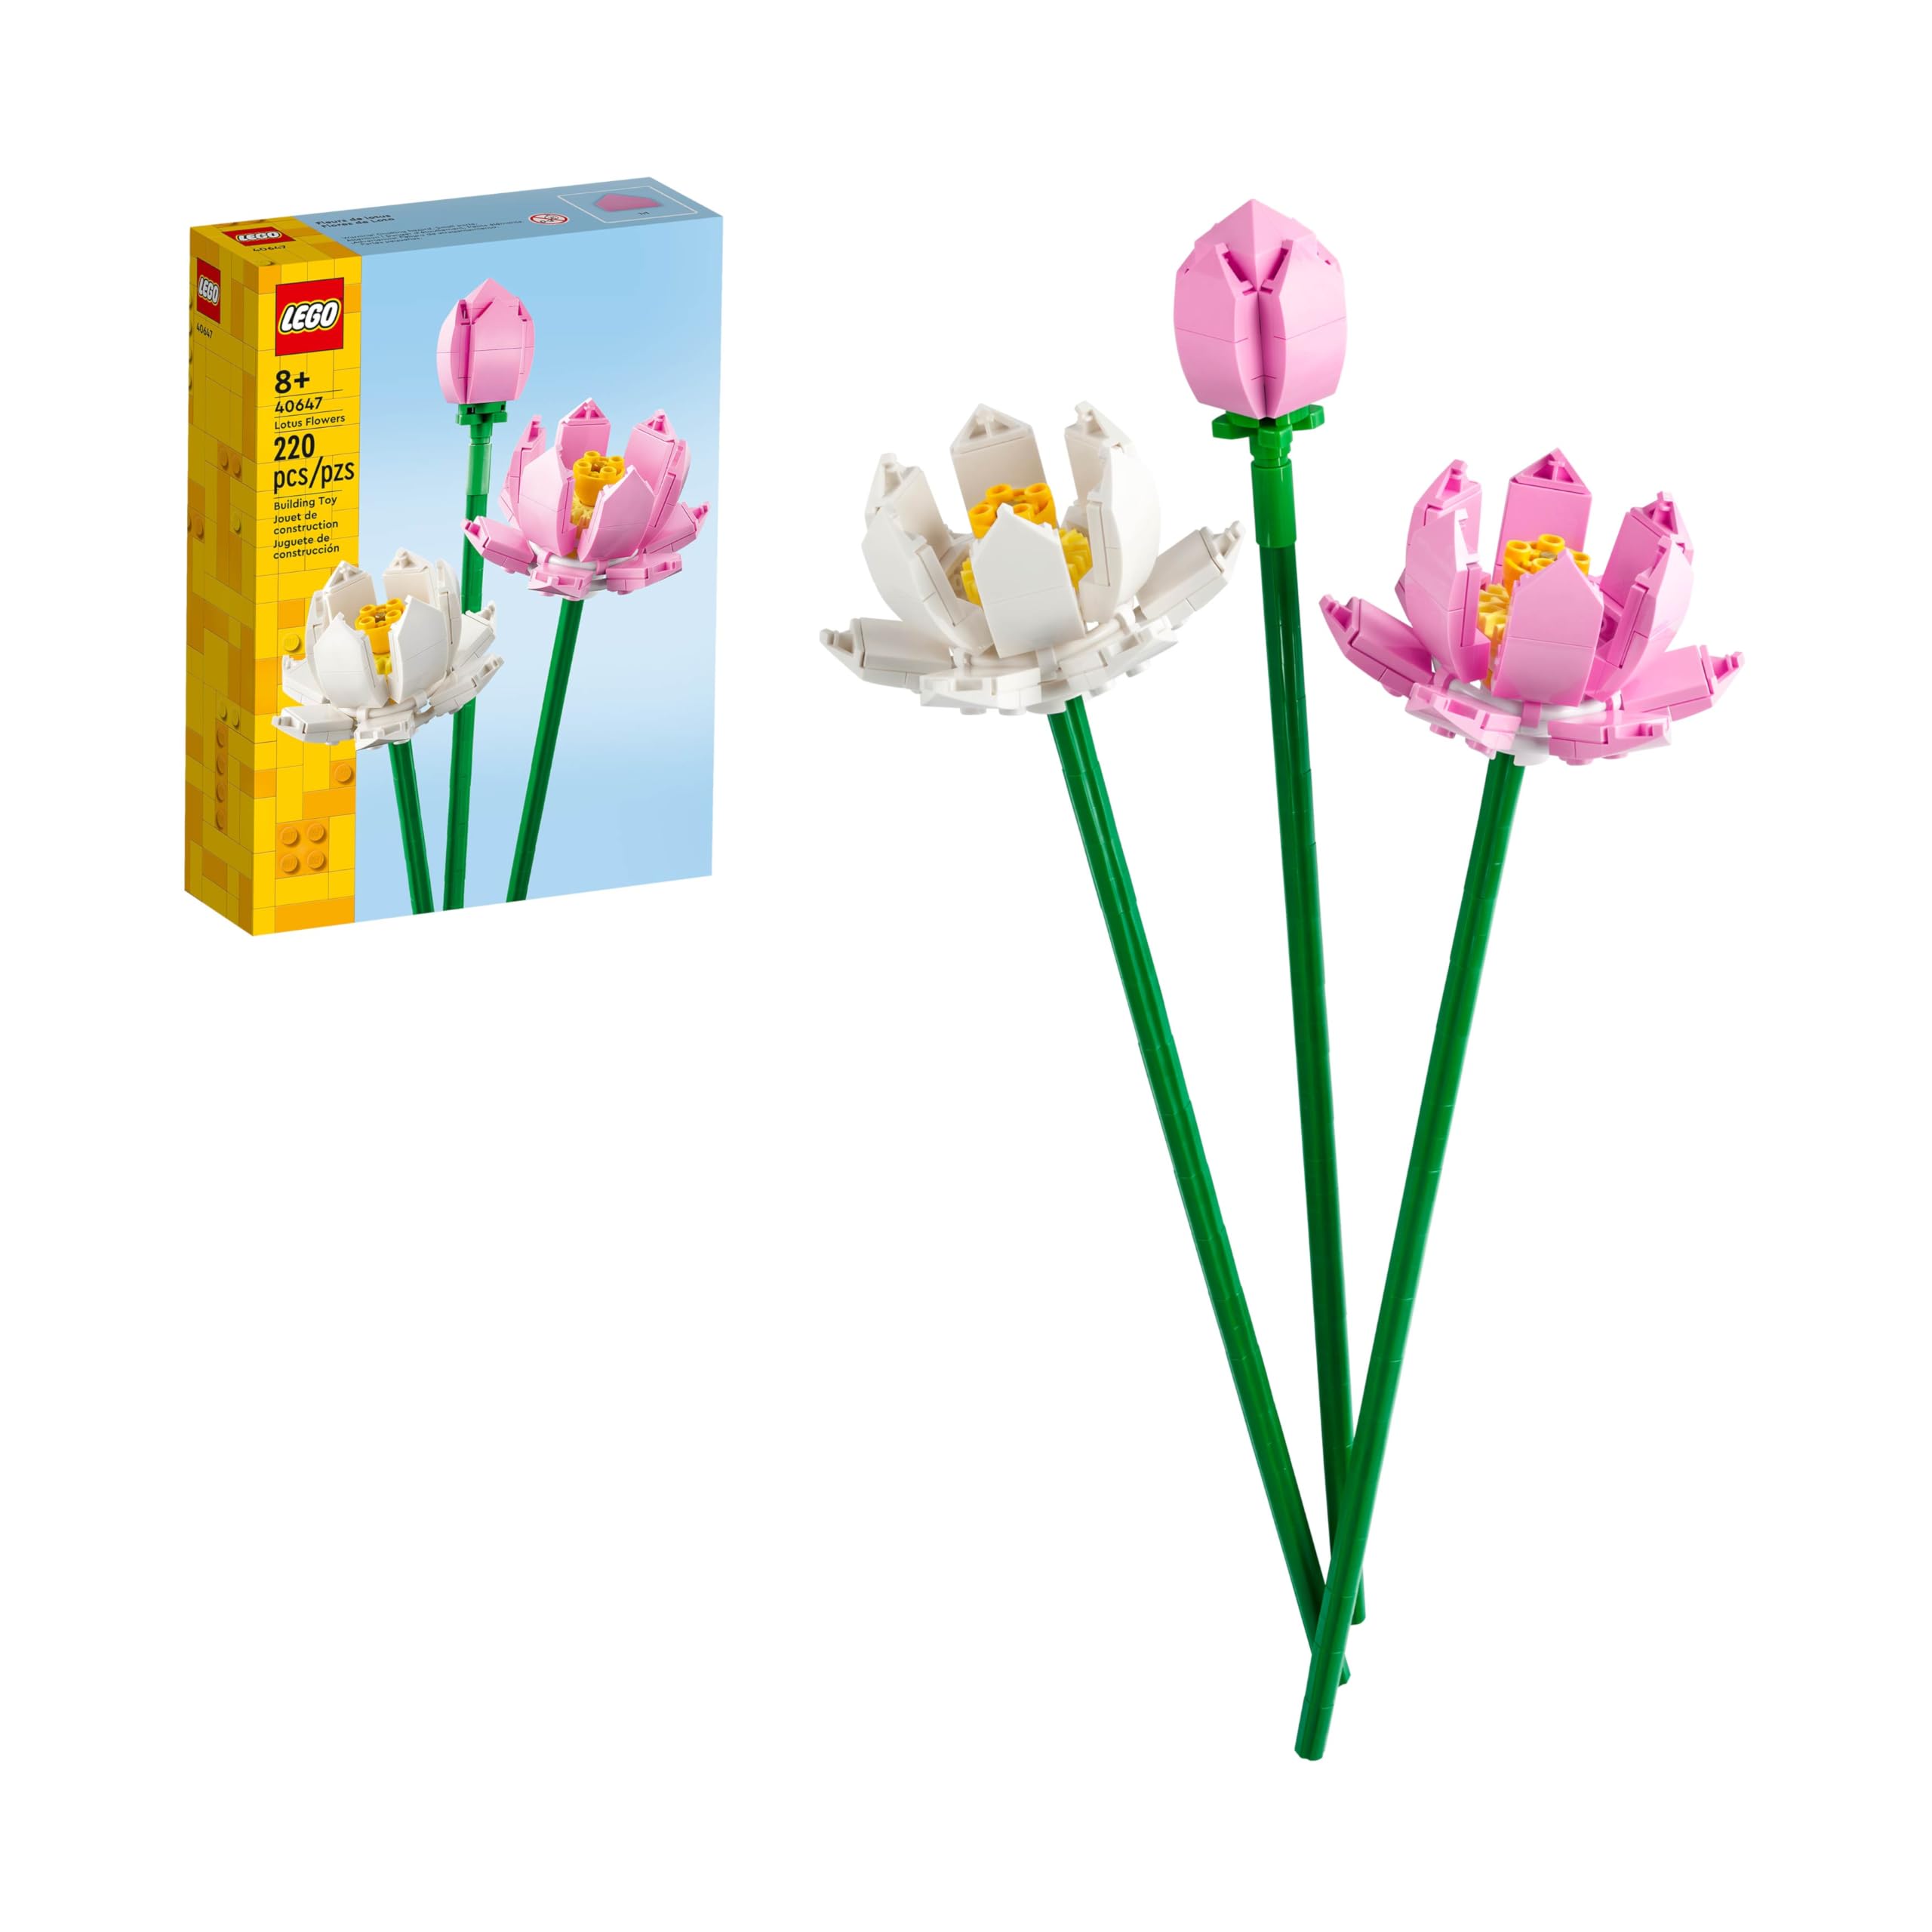 LEGO Lotus Artificial Flowers Building Kit $9.60 + Free Shipping w/ Prime or on $35+